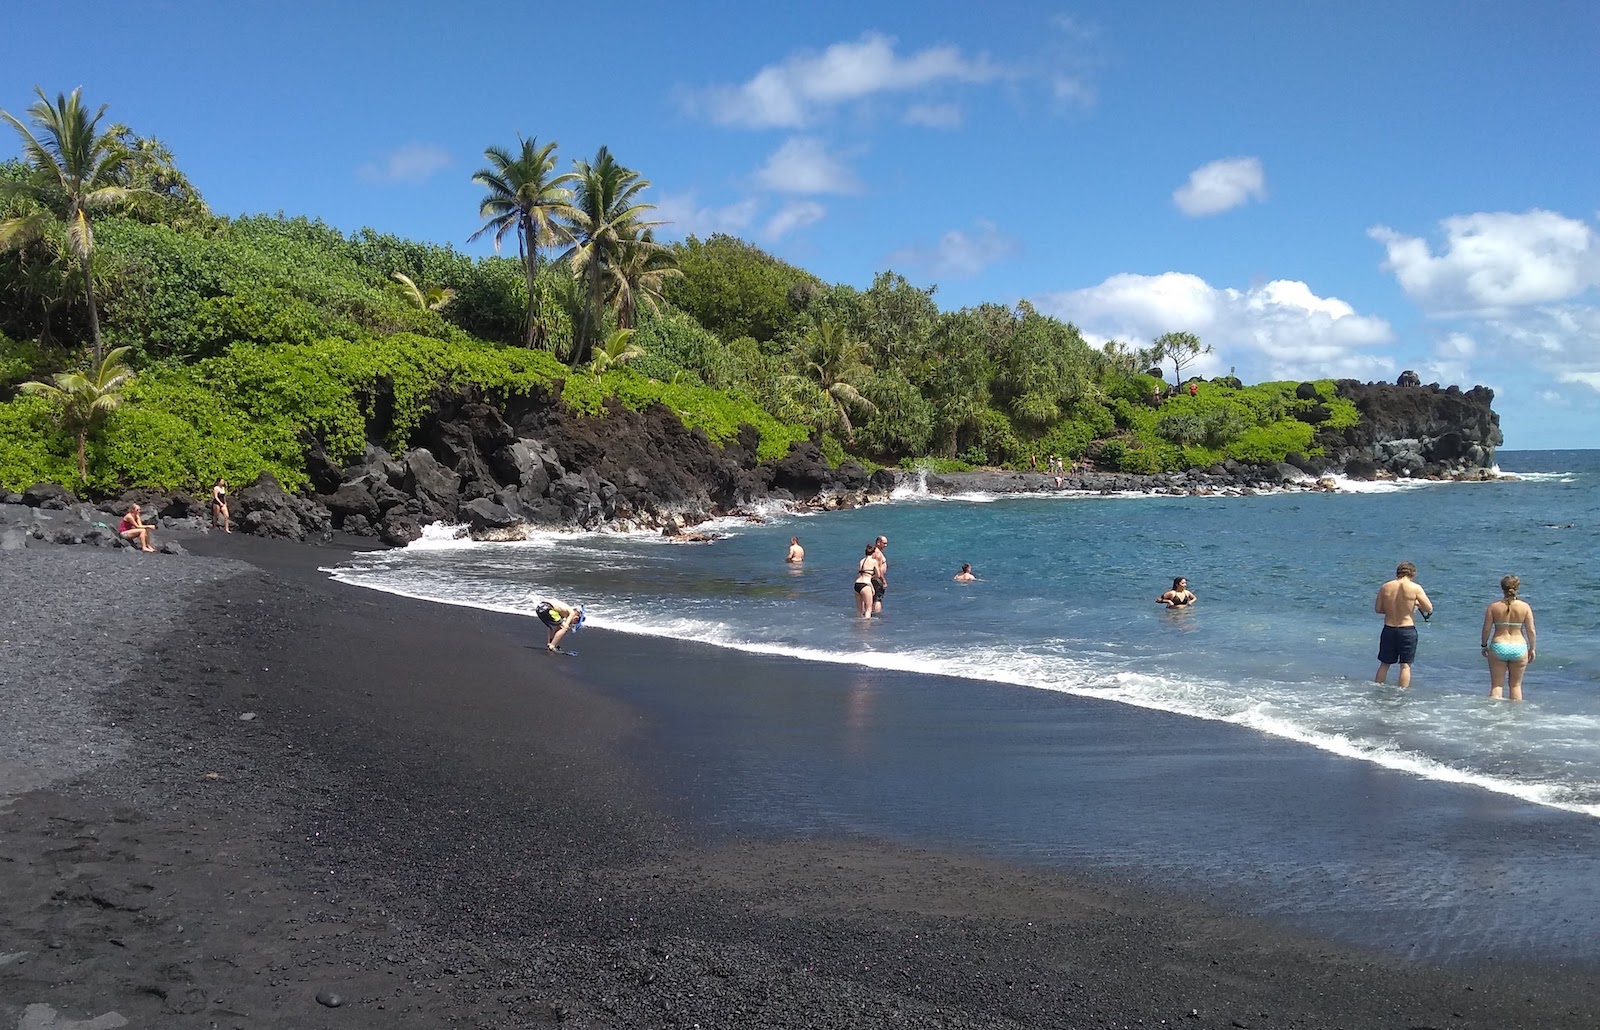 A view of people on the black sand beach at Wai’anapanapa State Park in Maui